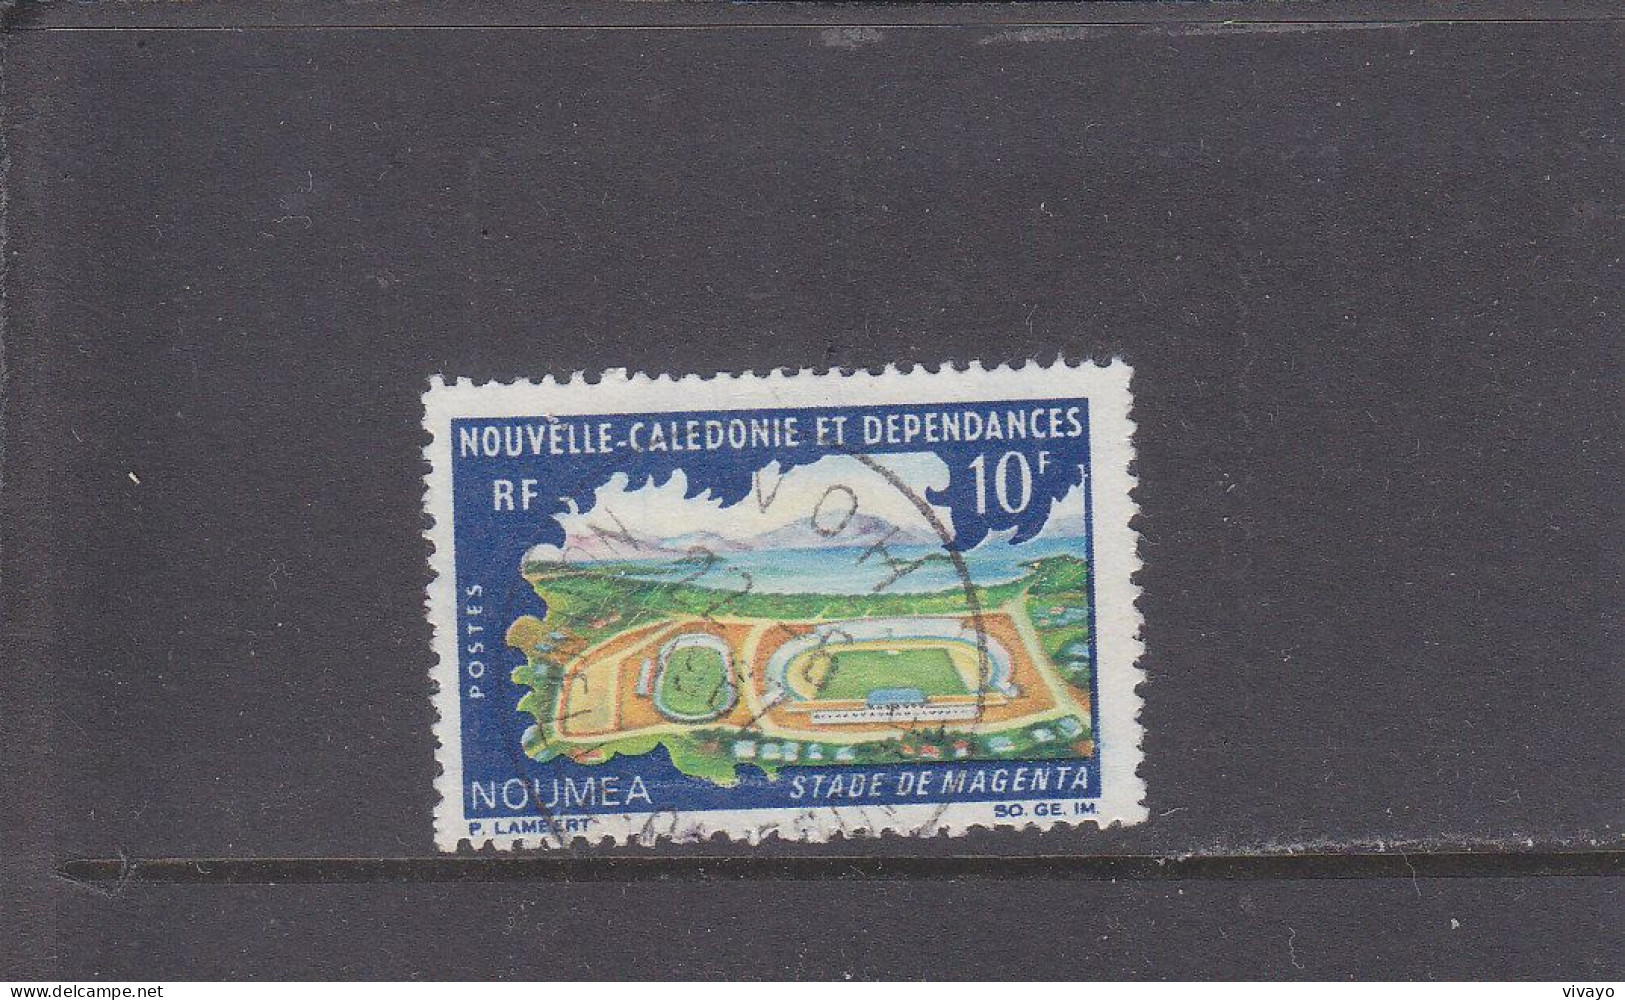 NOUVELLE CALEDONIE - O / FINE CANCELLED - 1967 - MAGENTA SPORTS STADIUM - Yv. 337 - Mi. 434 - Used Stamps